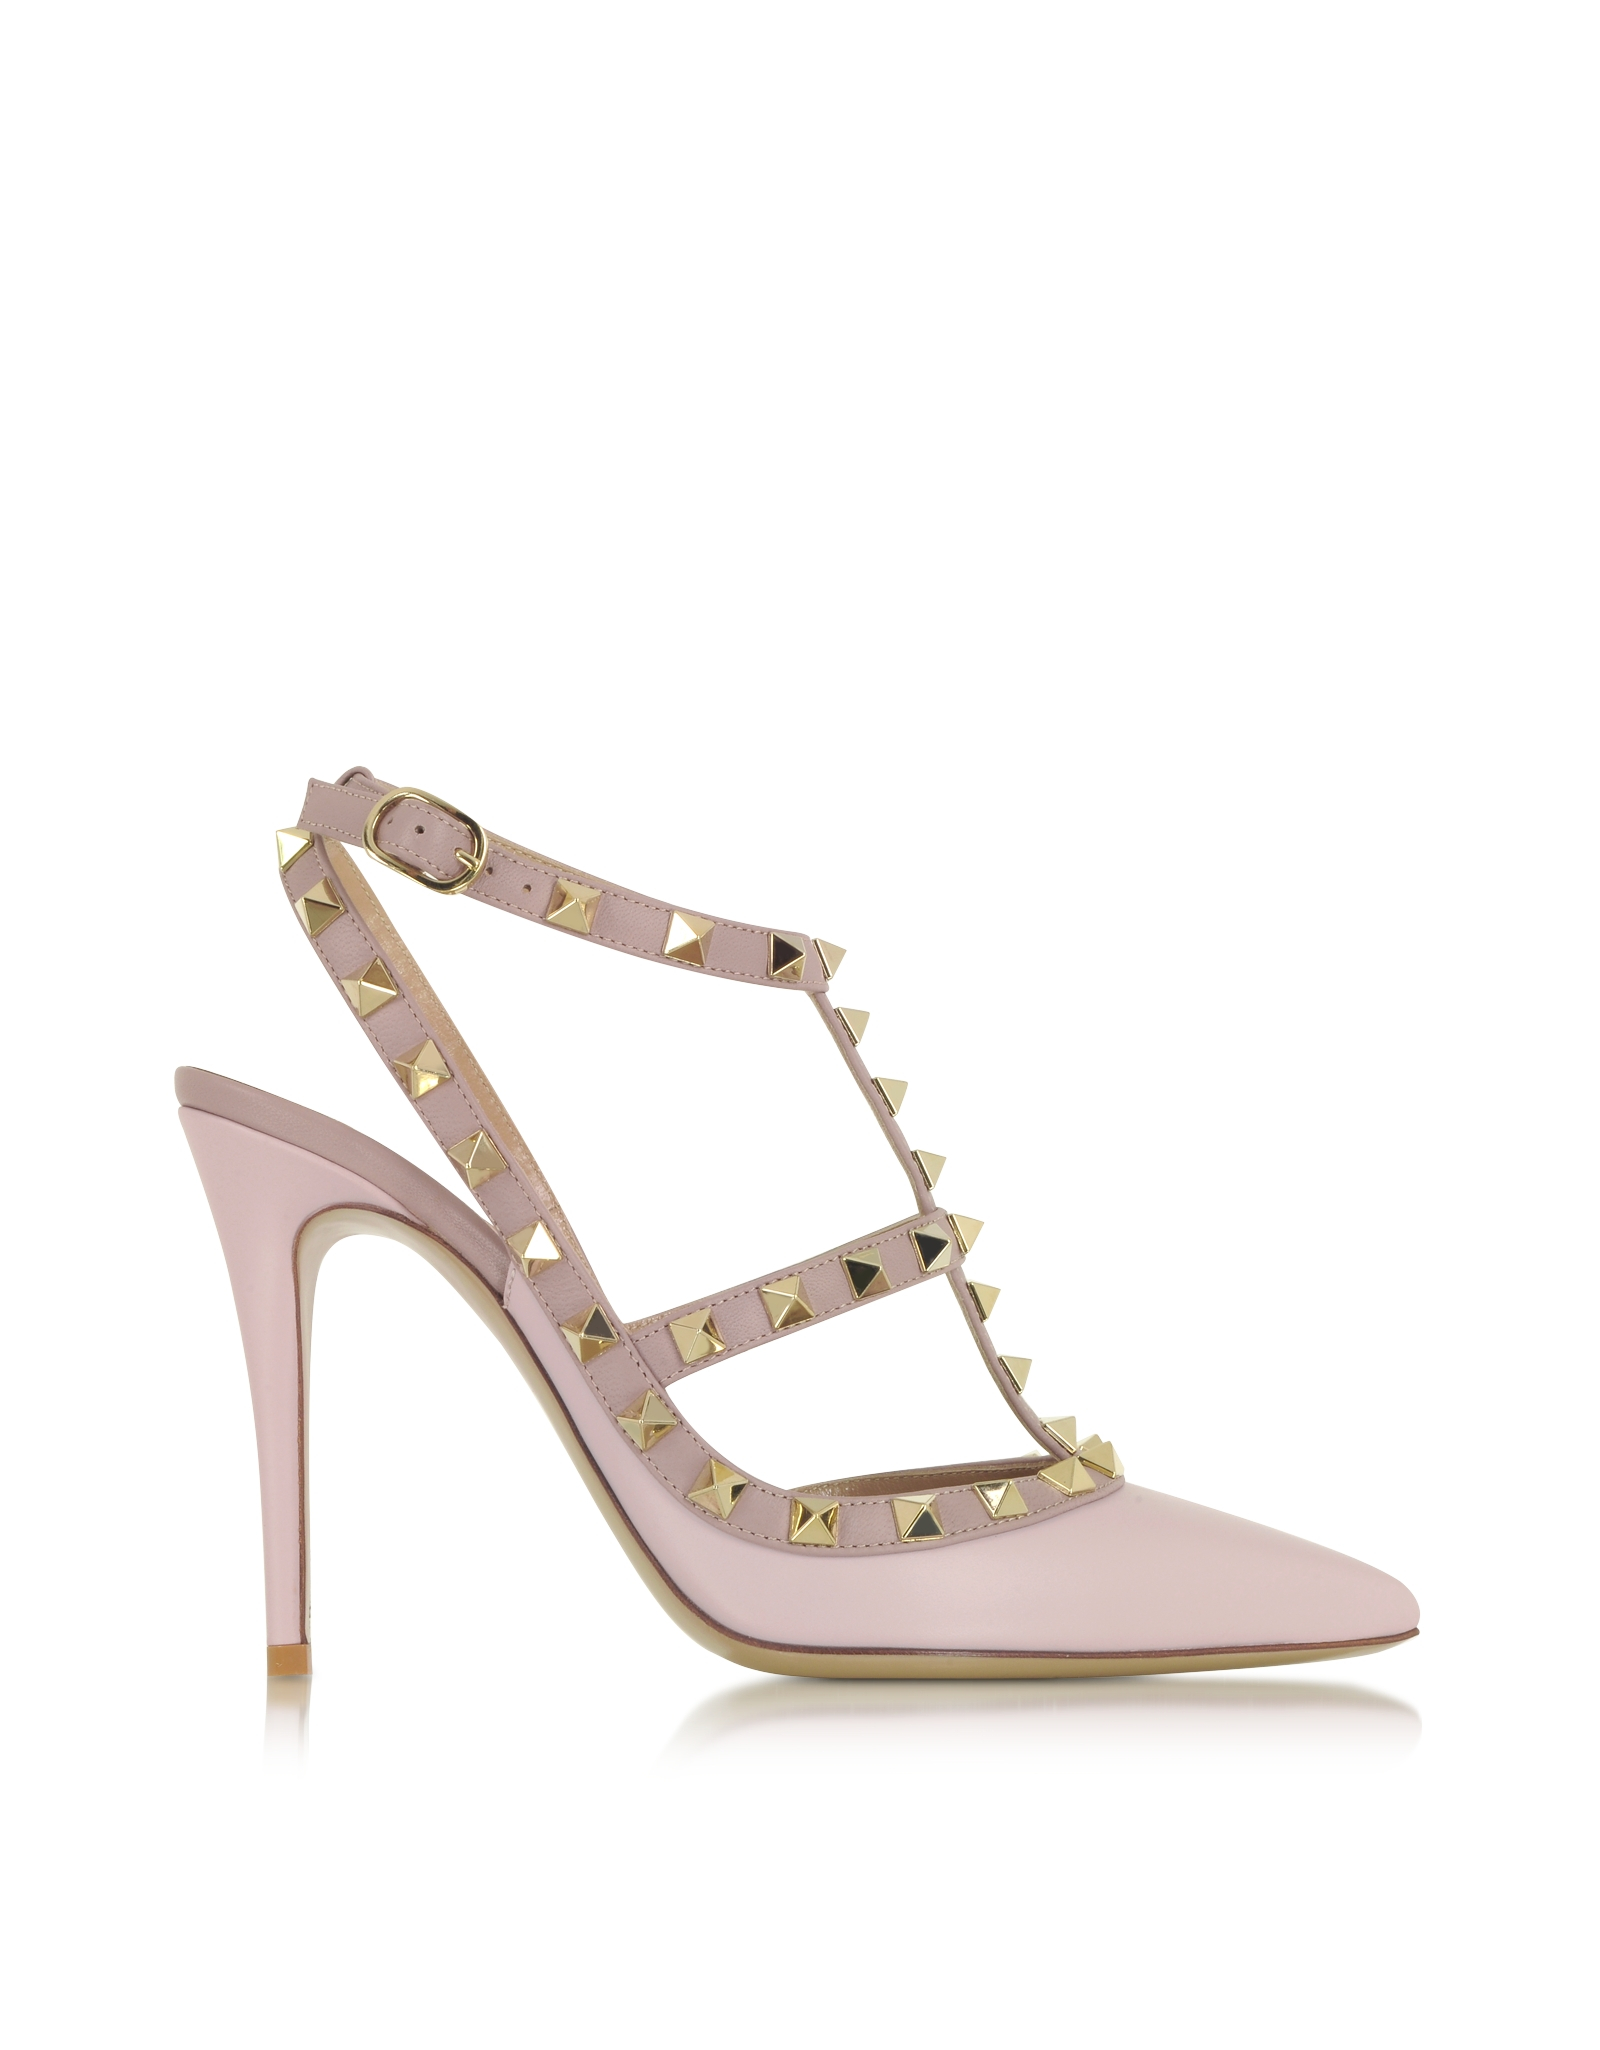 Lyst - Valentino Rockstud Water Rose & Powder Leather Ankle Strap Pump ...